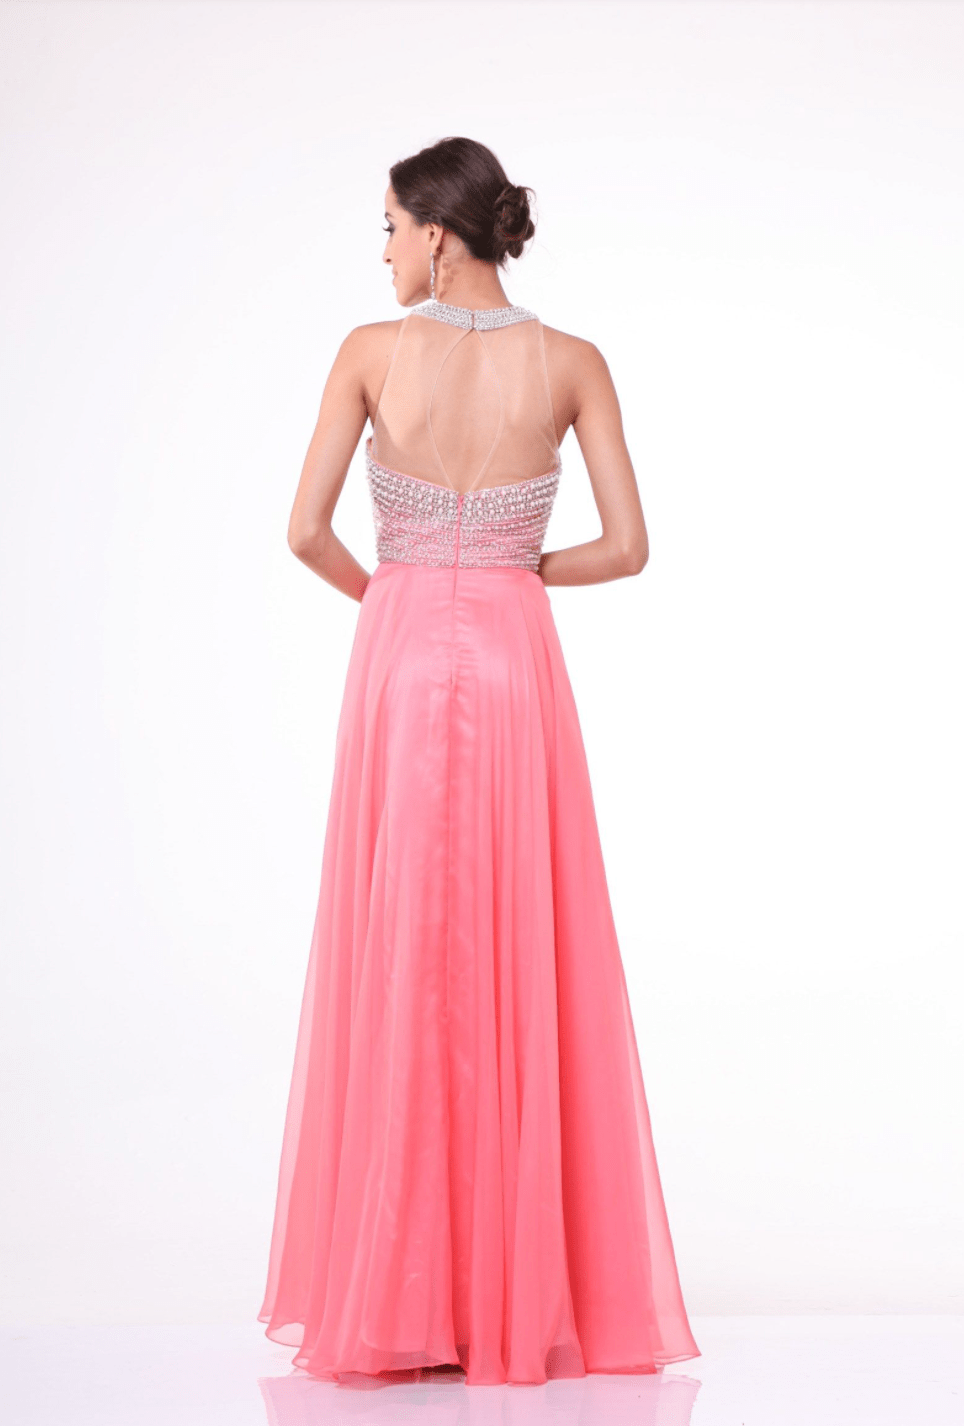 Sparkling Halter Style Chiffon Dress By Cinderella Divine - NORMA REED